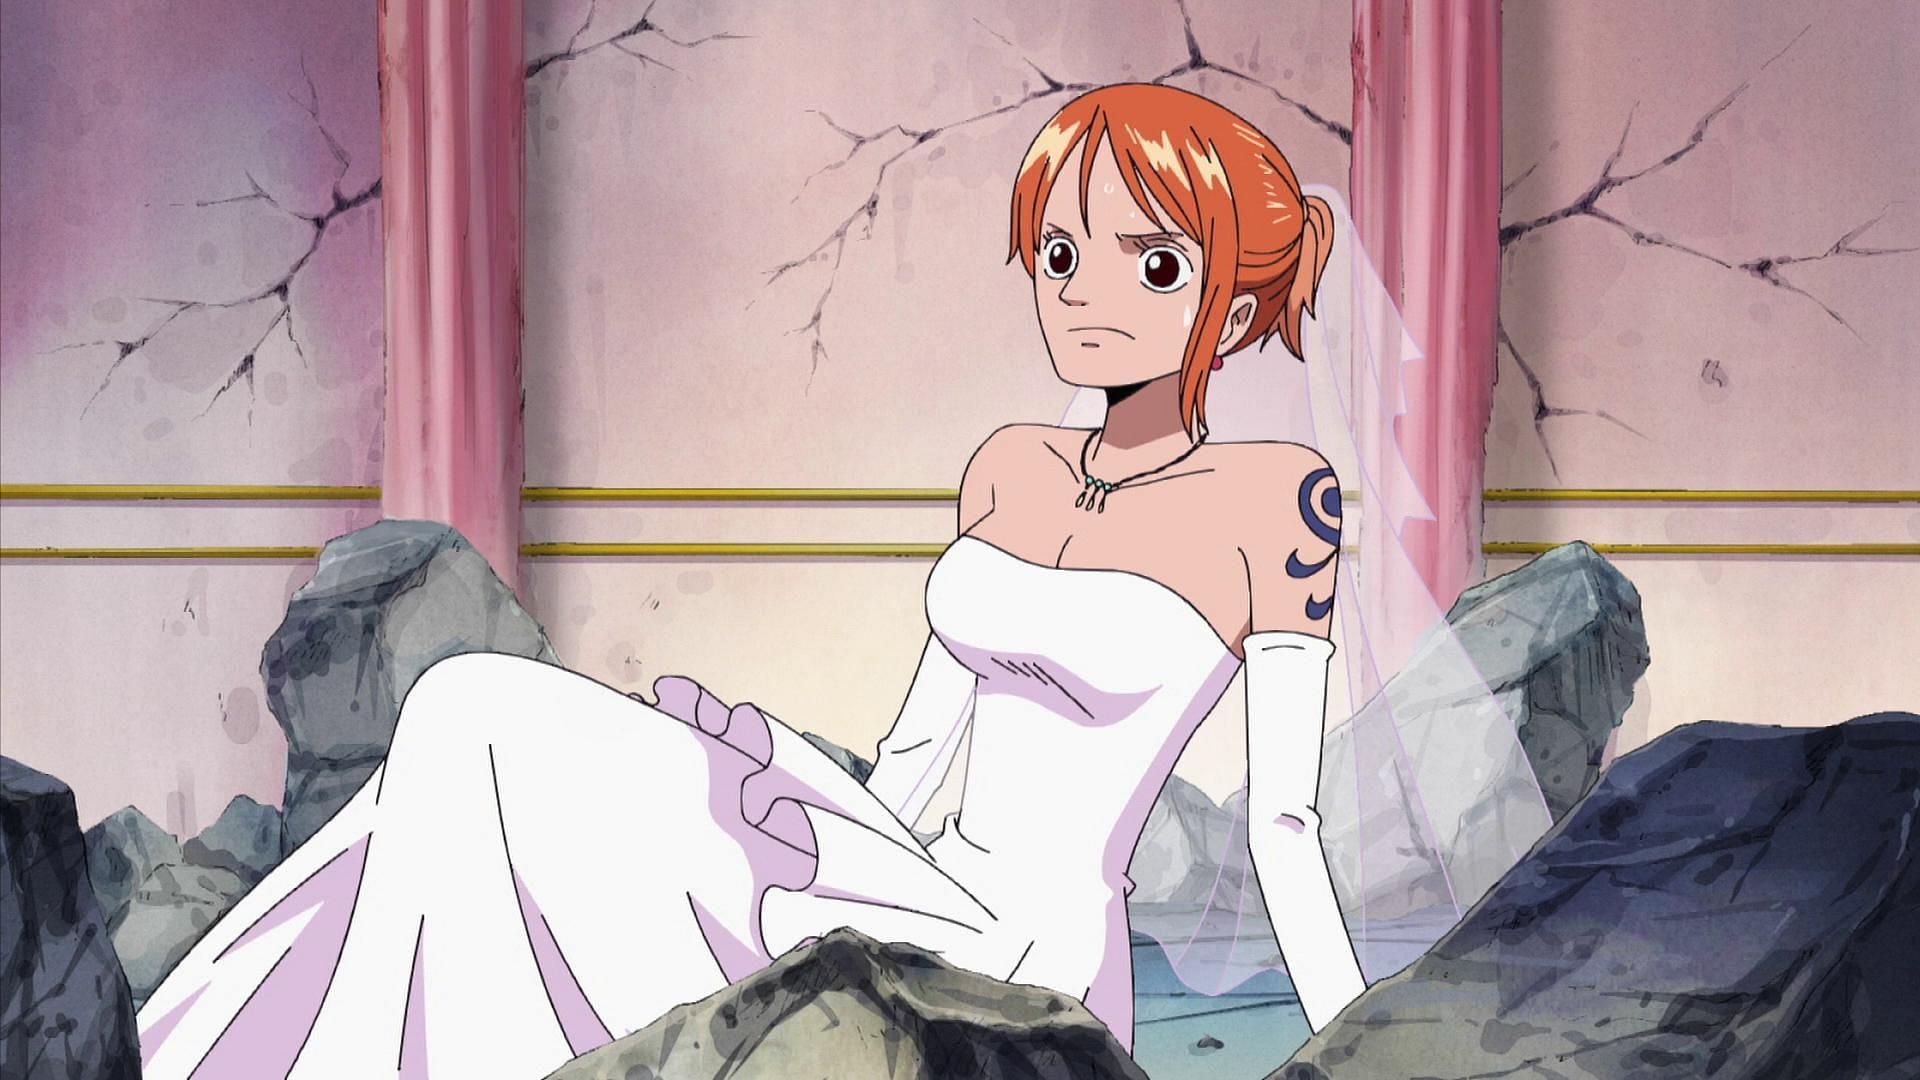 Nami in her wedding dress as seen in Thriller Bark (Image via Toei Animation, One Piece)